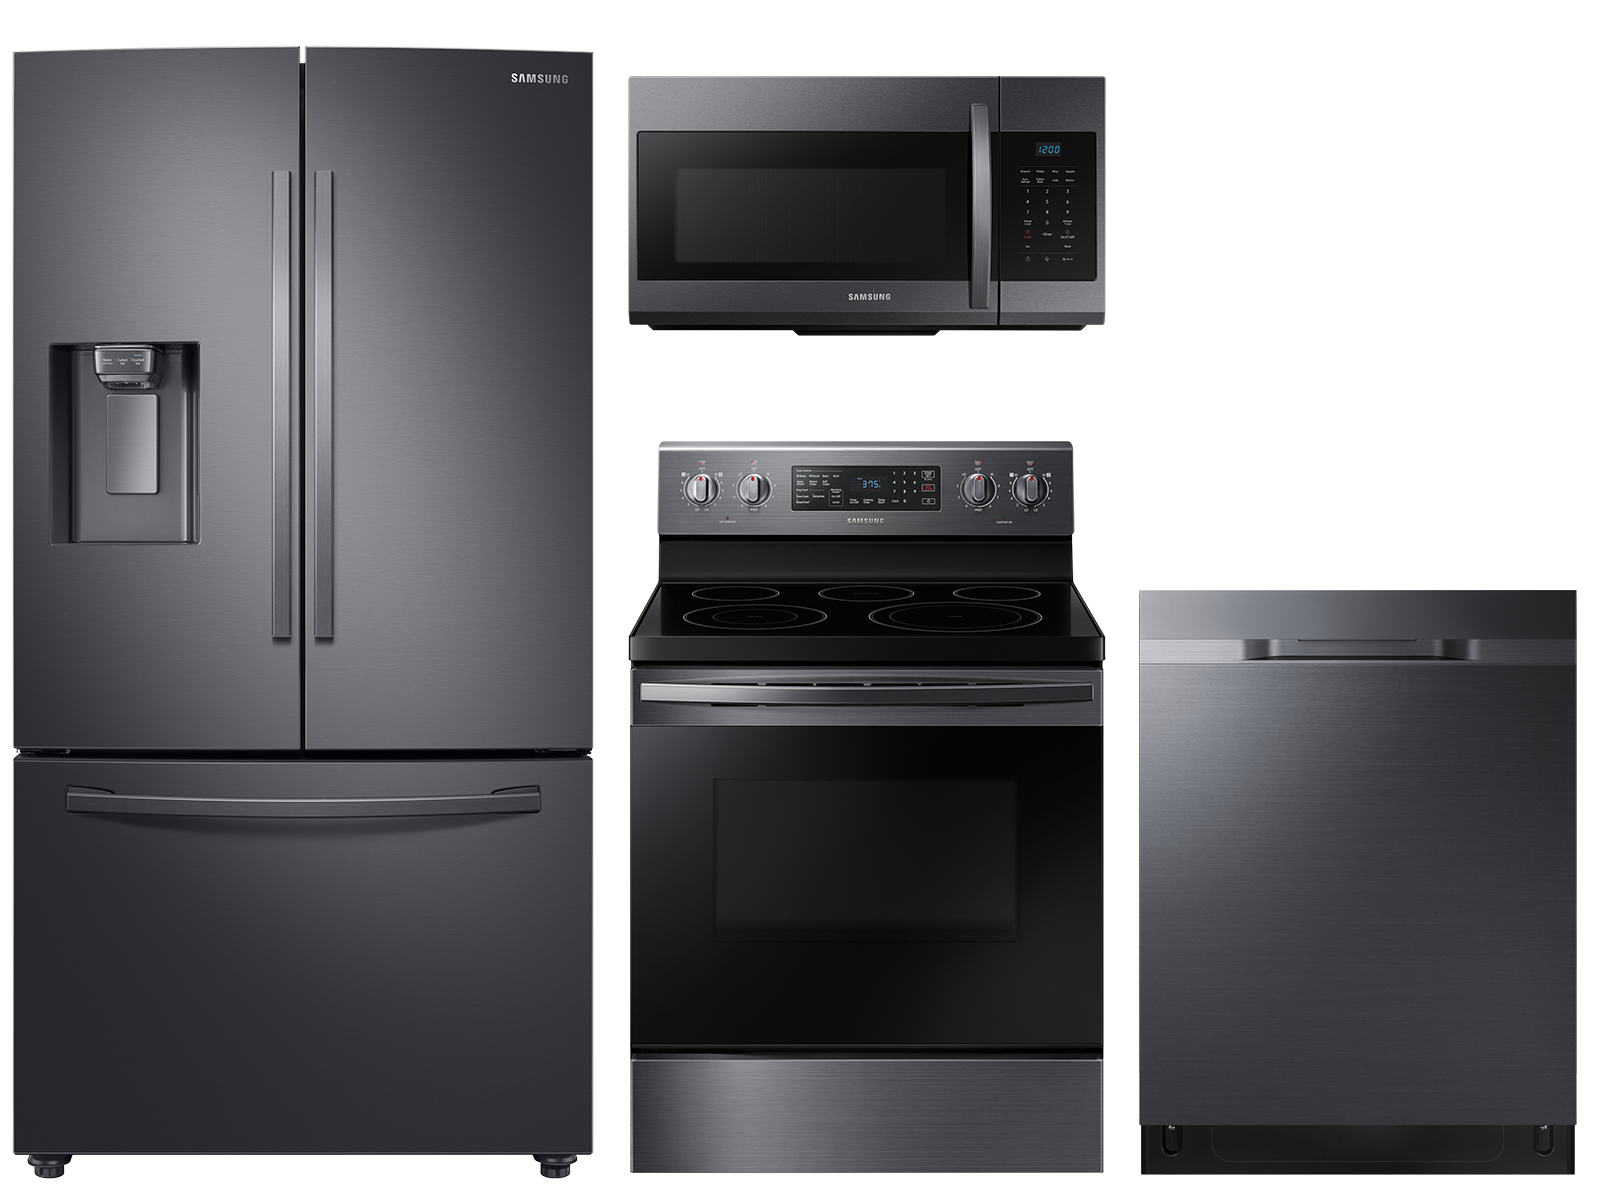 Large Capacity 3-door Refrigerator + Electric Range with Convection + StormWash™ Dishwasher + Microwave in Black Stainless